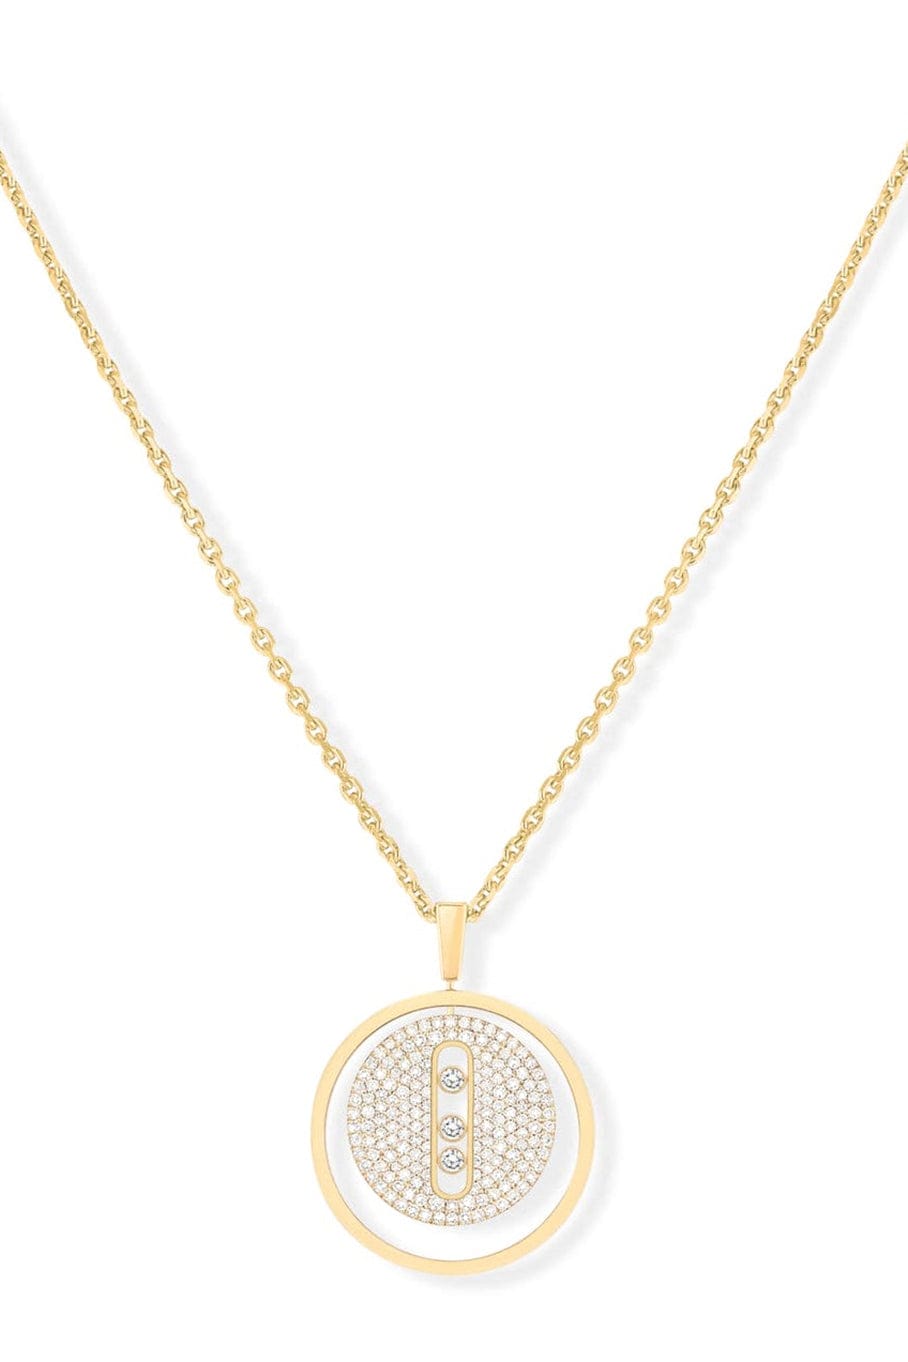 MESSIKA-Lucky Move Diamond Necklace-YELLOW GOLD